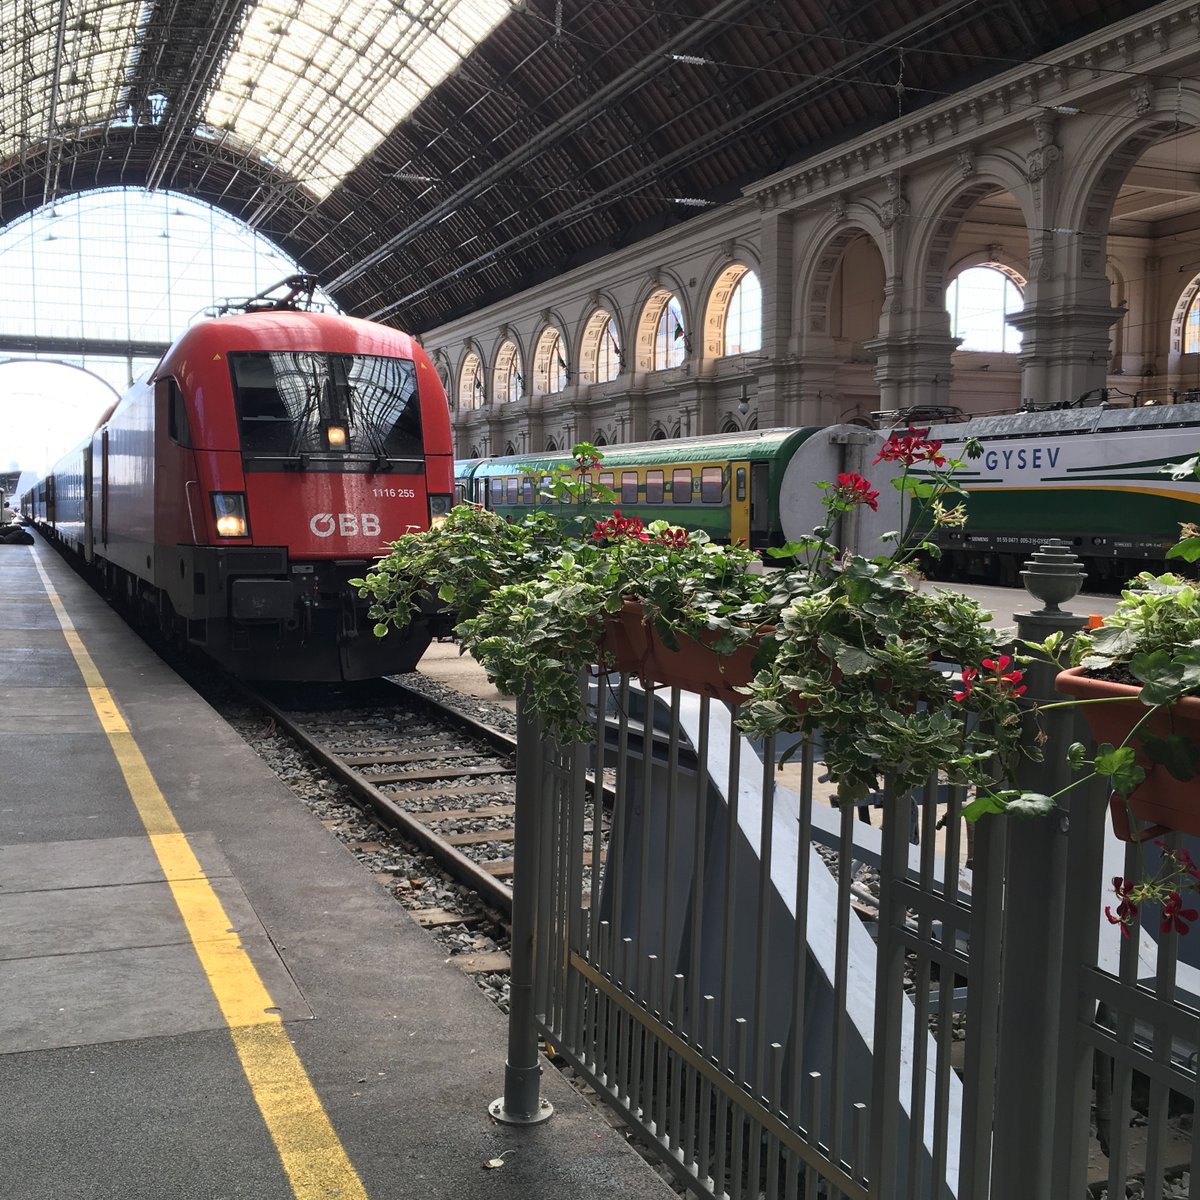 Bonus trainspotting, and a glimpse of the fine interior of Keleti station before we move on...  #theCitybyrail